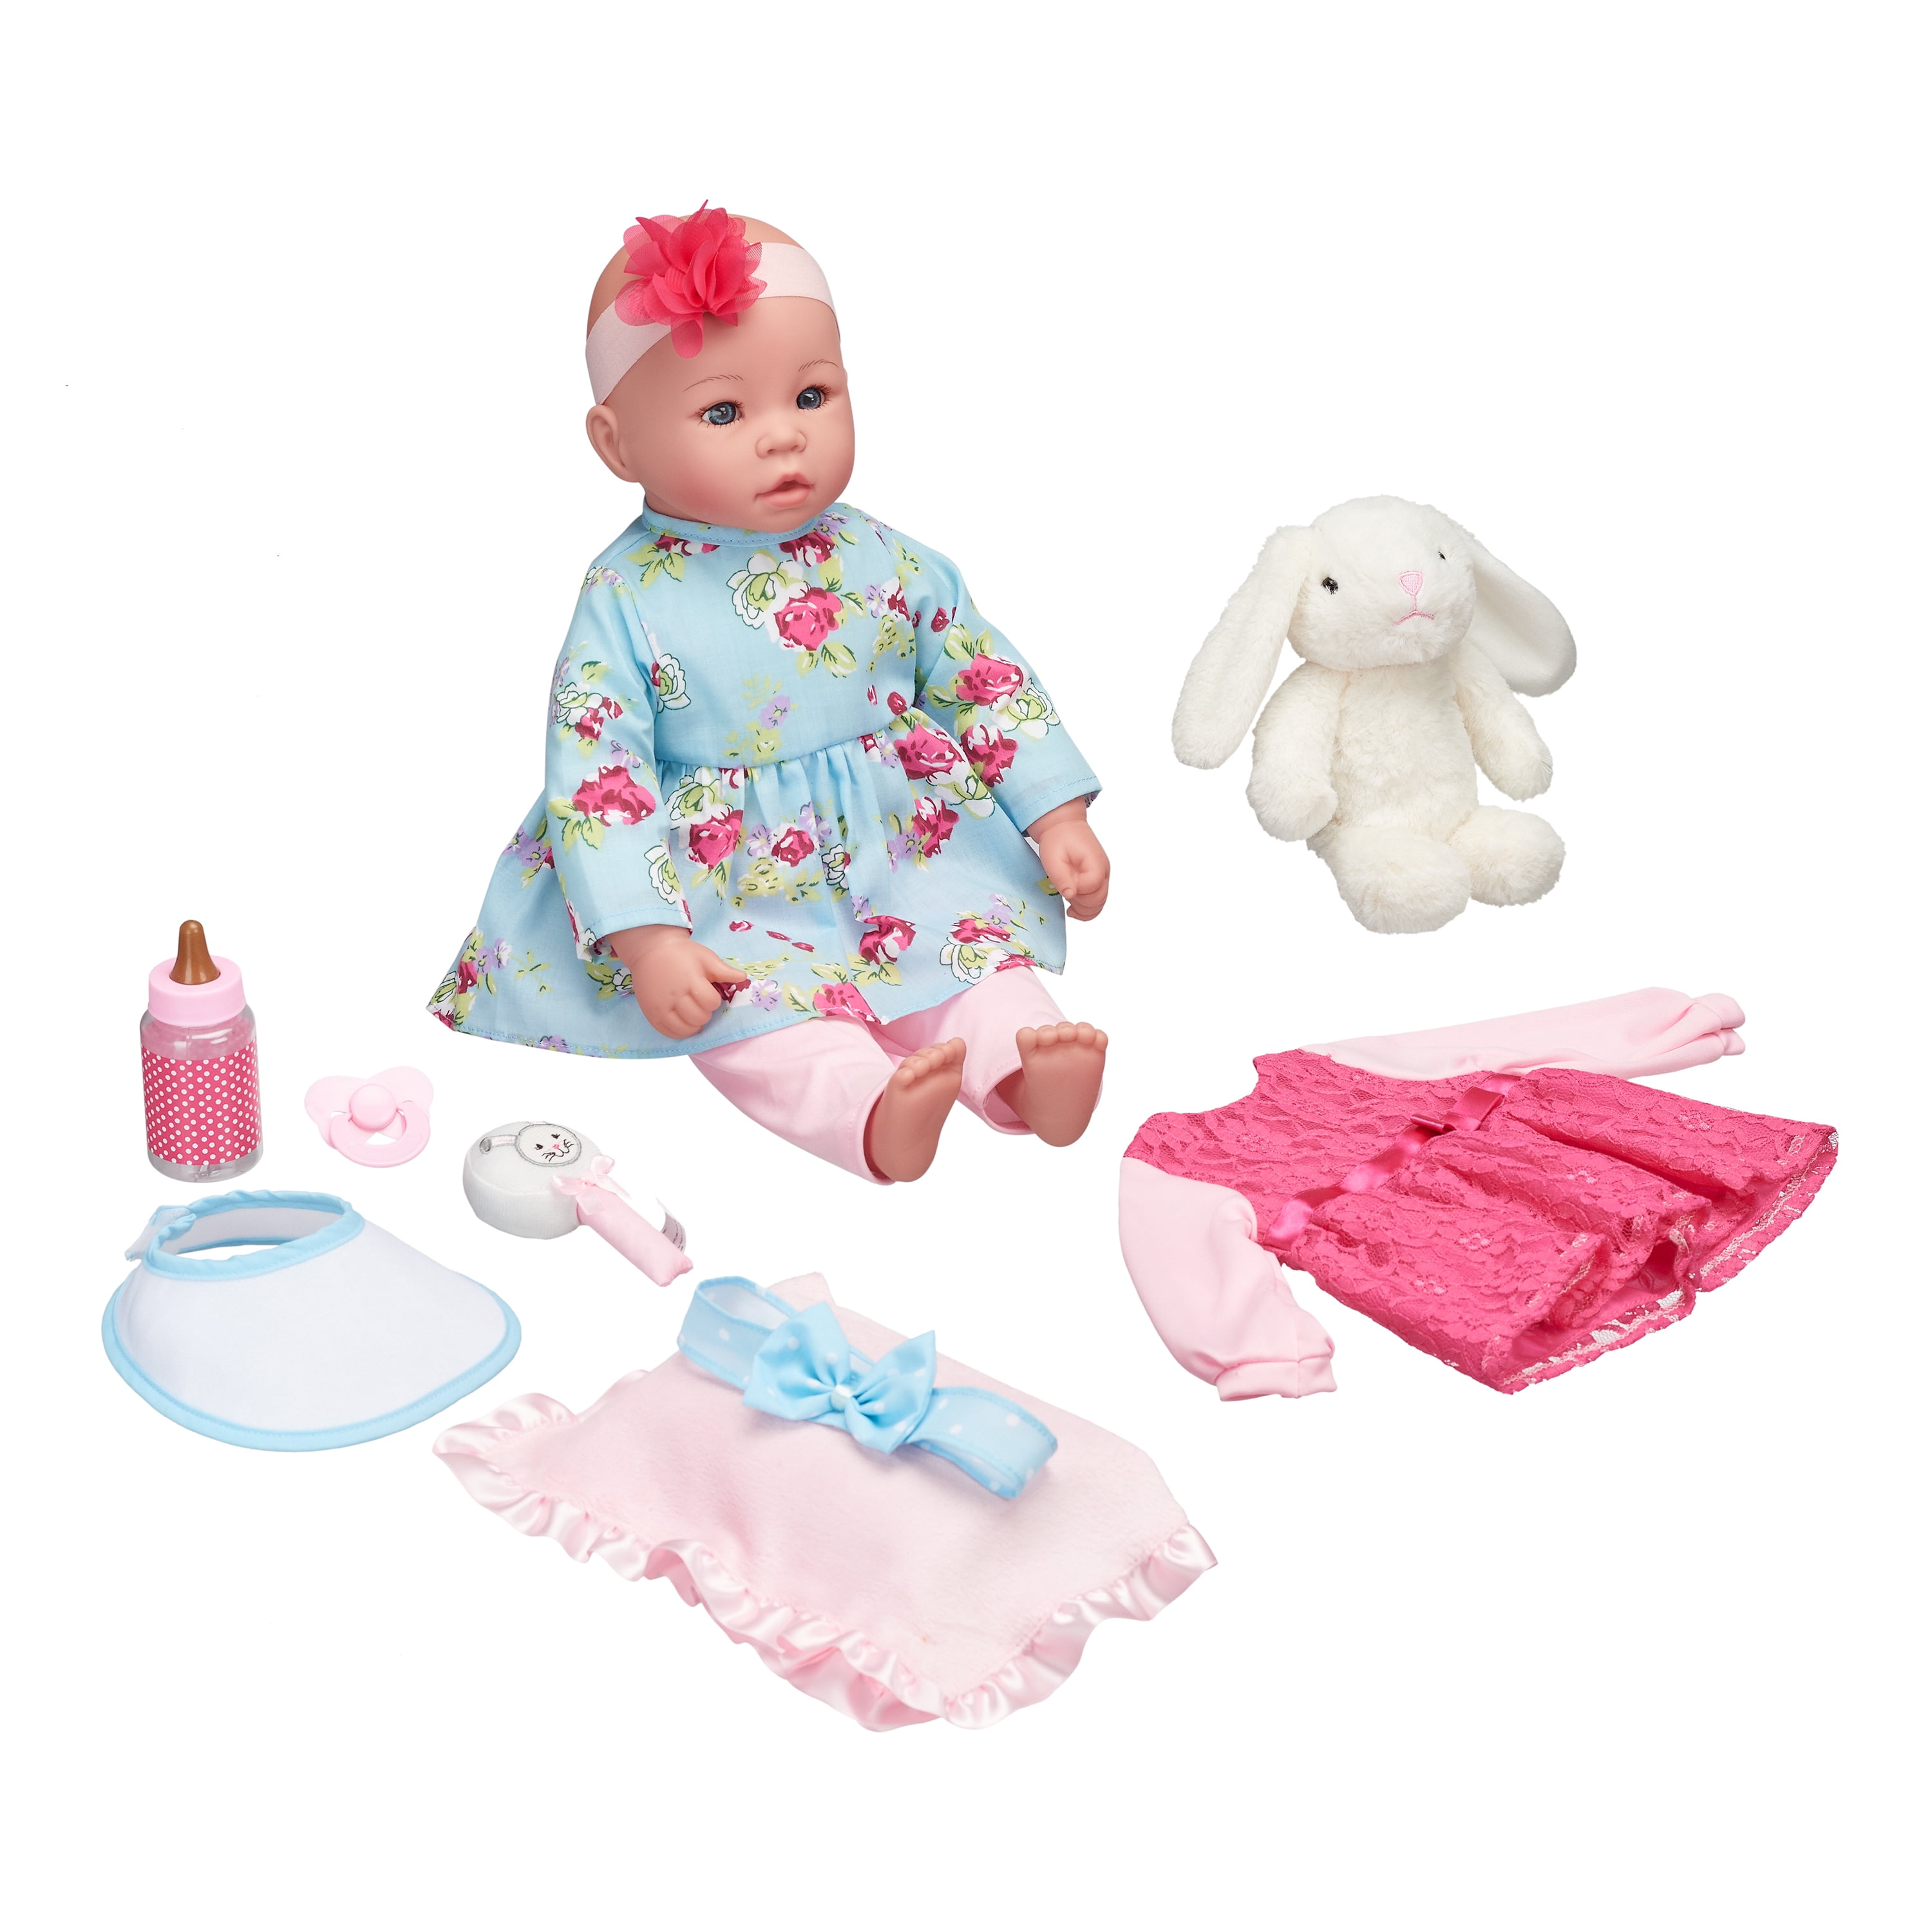 Little Baby Twins 2 Baby Dolls With Dummy Accessory Toy Playset 